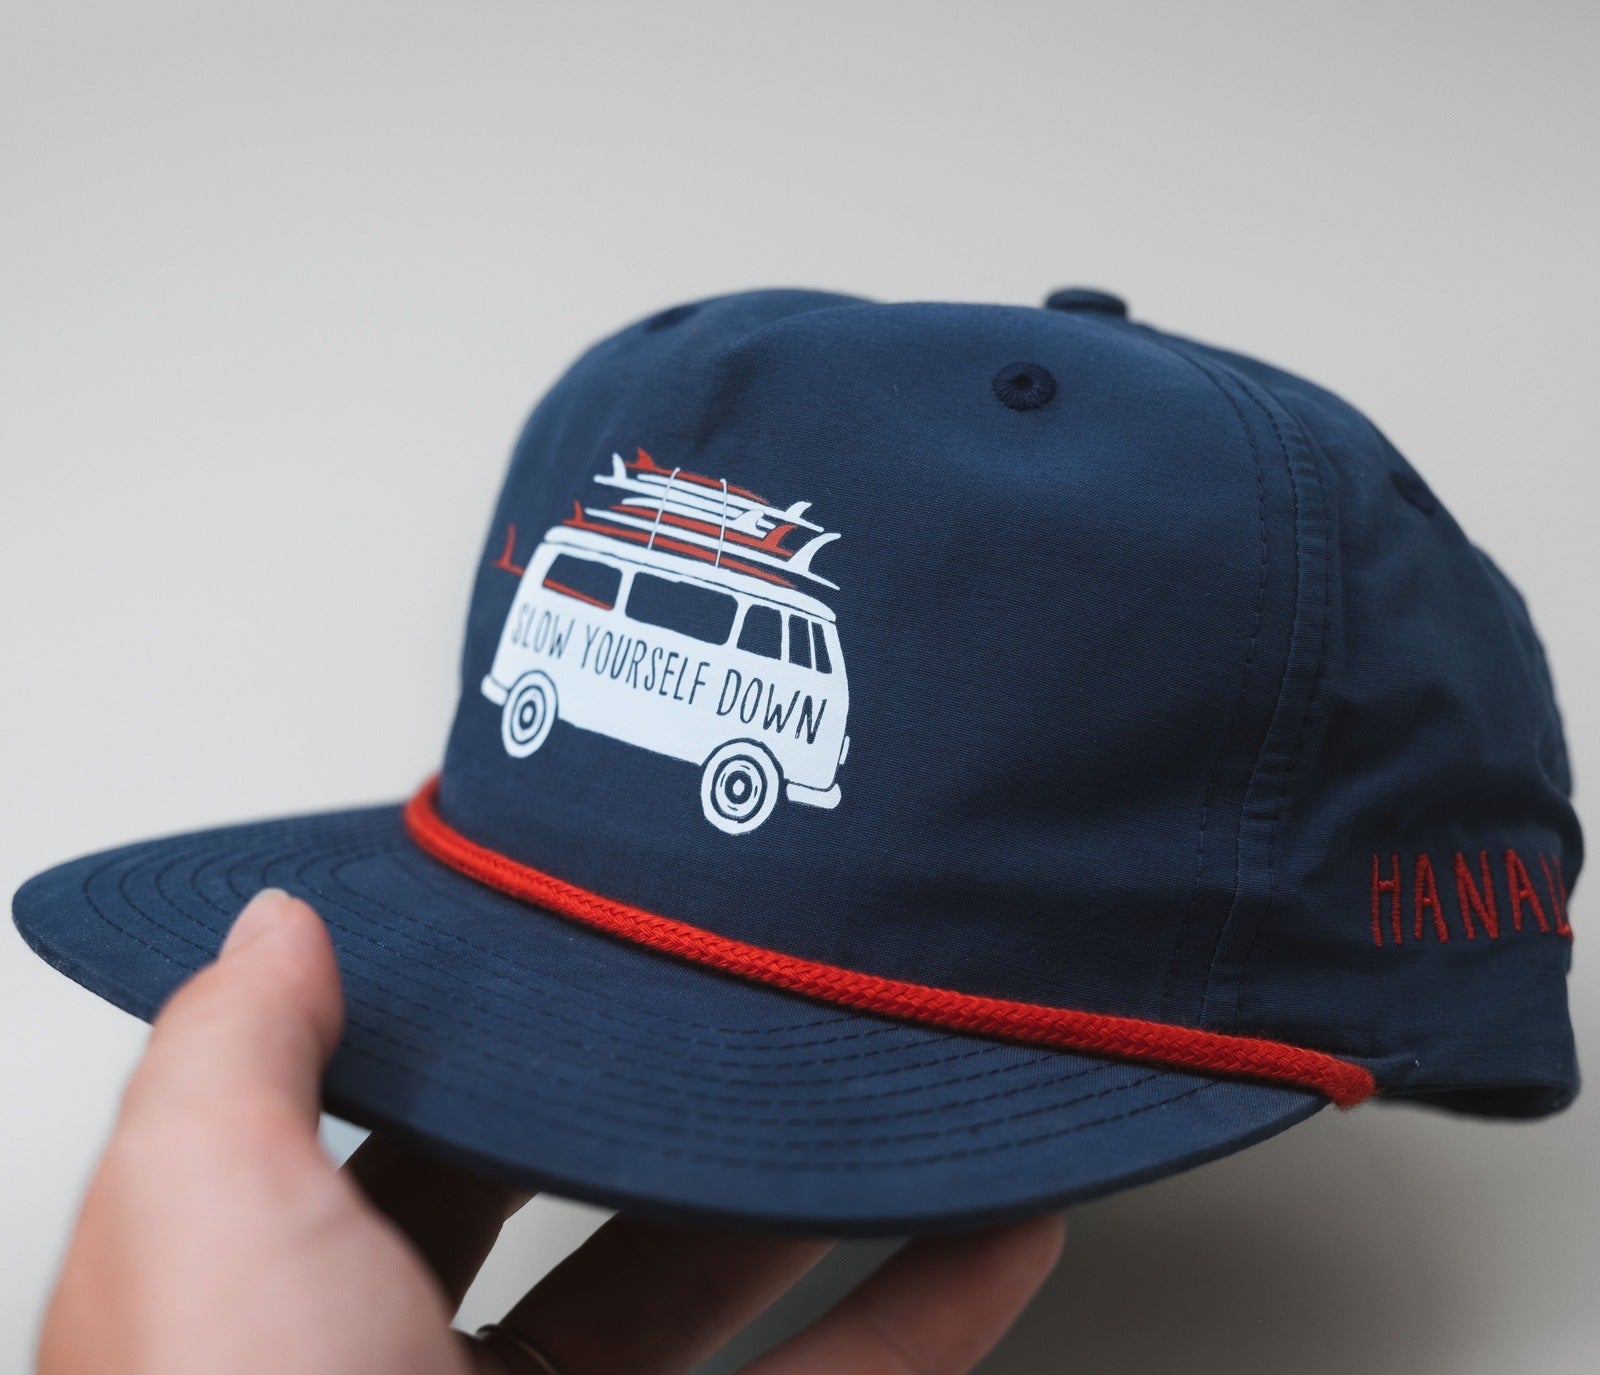 Surf Van Boaters Hat Hats - Slow Yourself Down